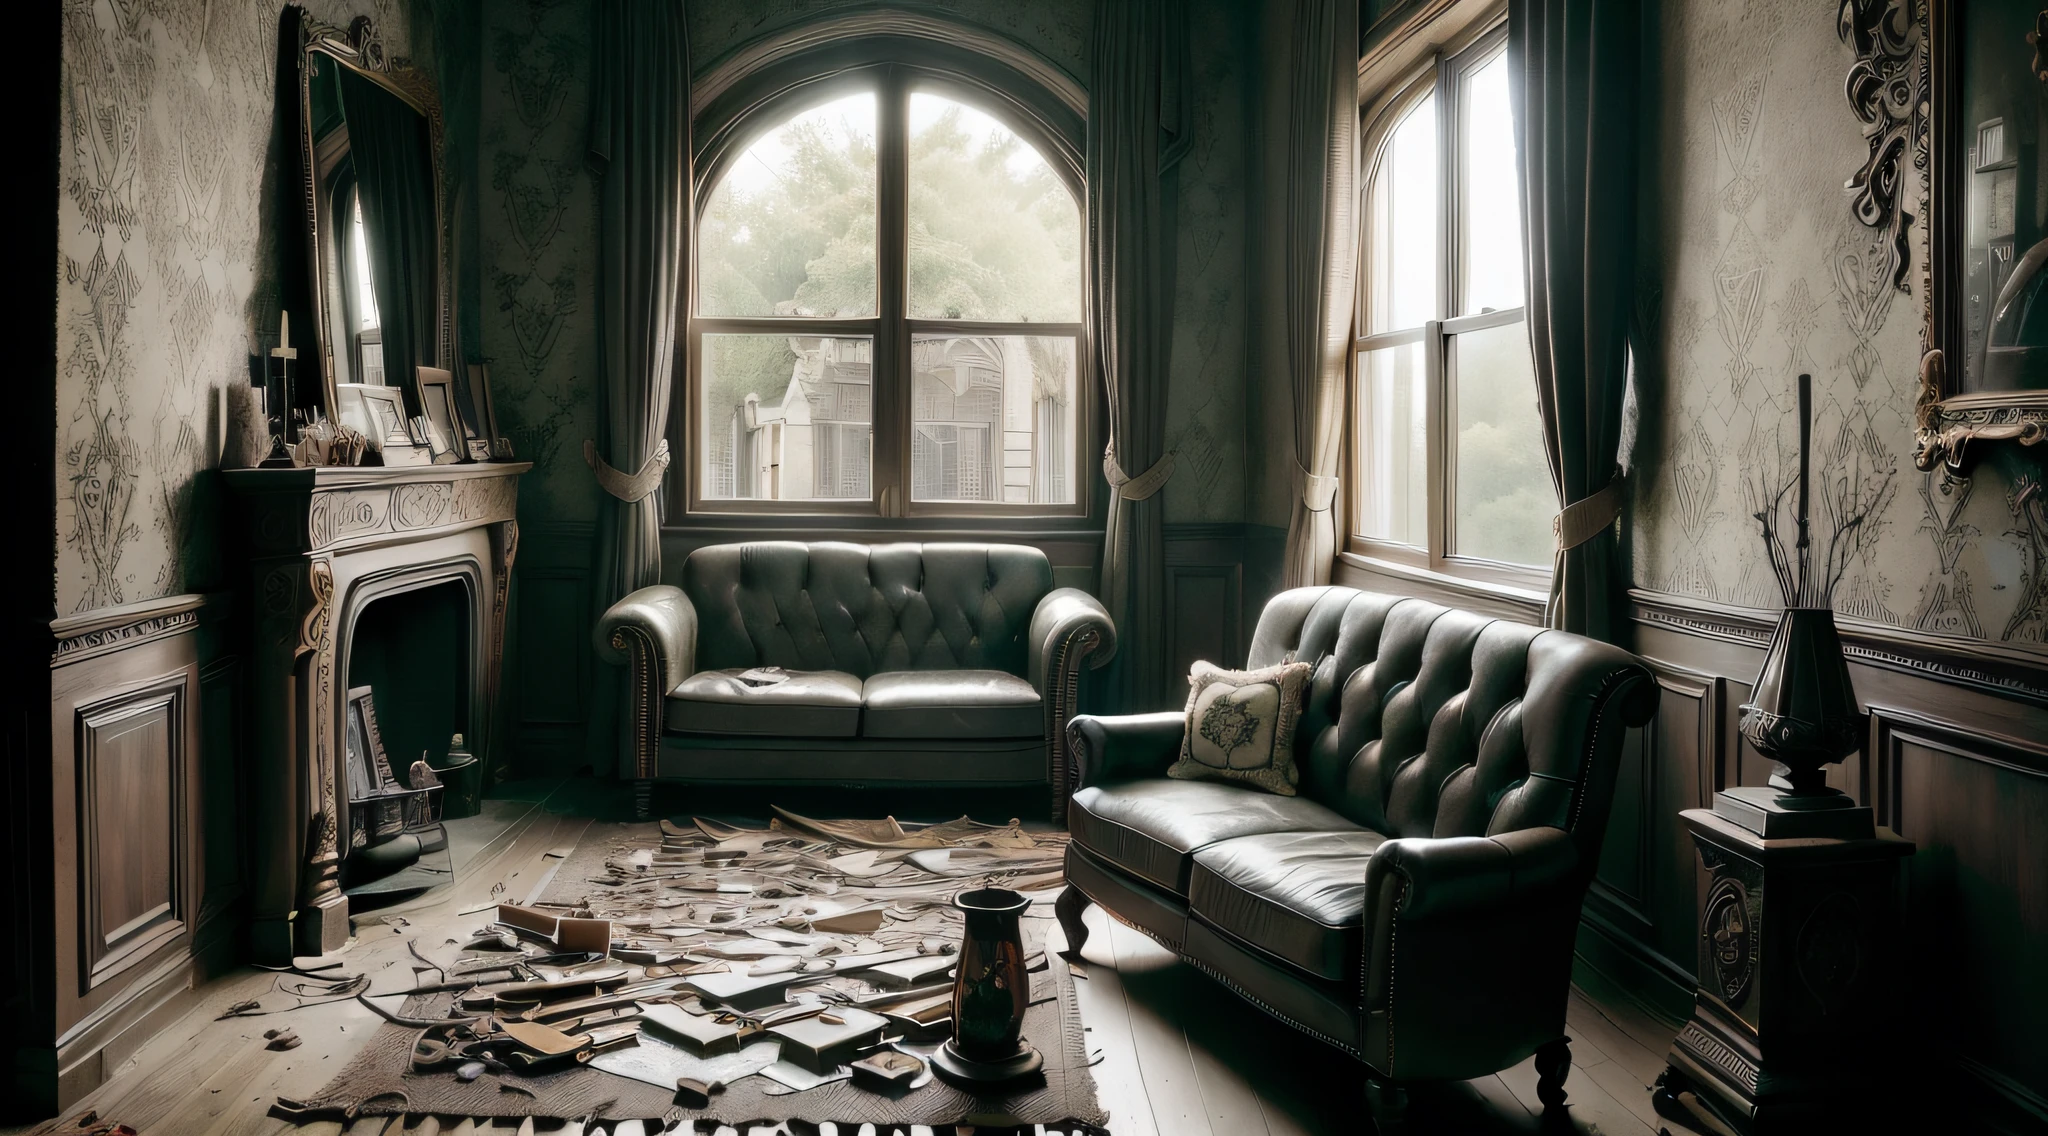 (interior design) (masterpiece) (ultra realistic) (raw) (picture of the whole room) (messy) (gothic couch, rocking chair, window) (old house, ripped wallpaper) (wide lens) (an old gothic scarry horror room) (blood on the wall) (dark) (candles) (candle lit) (paranormal feelings) (anamorphic lens) (night time) (haunted) (dirty) (god rays)